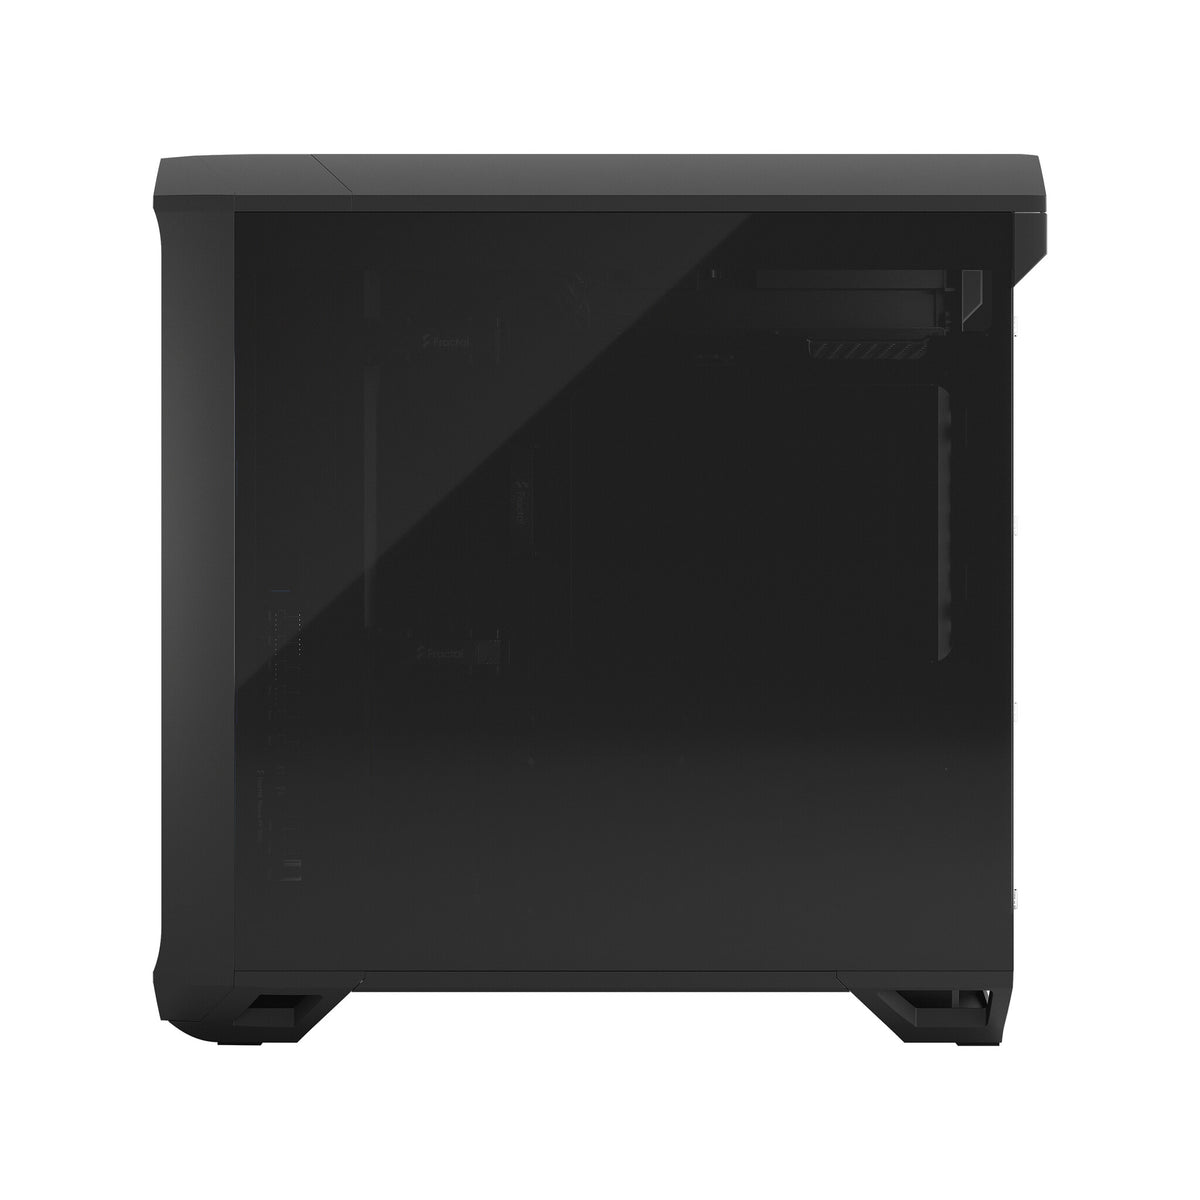 Fractal Design Torrent Compact - RGB ATX Mid Tower Case in Black